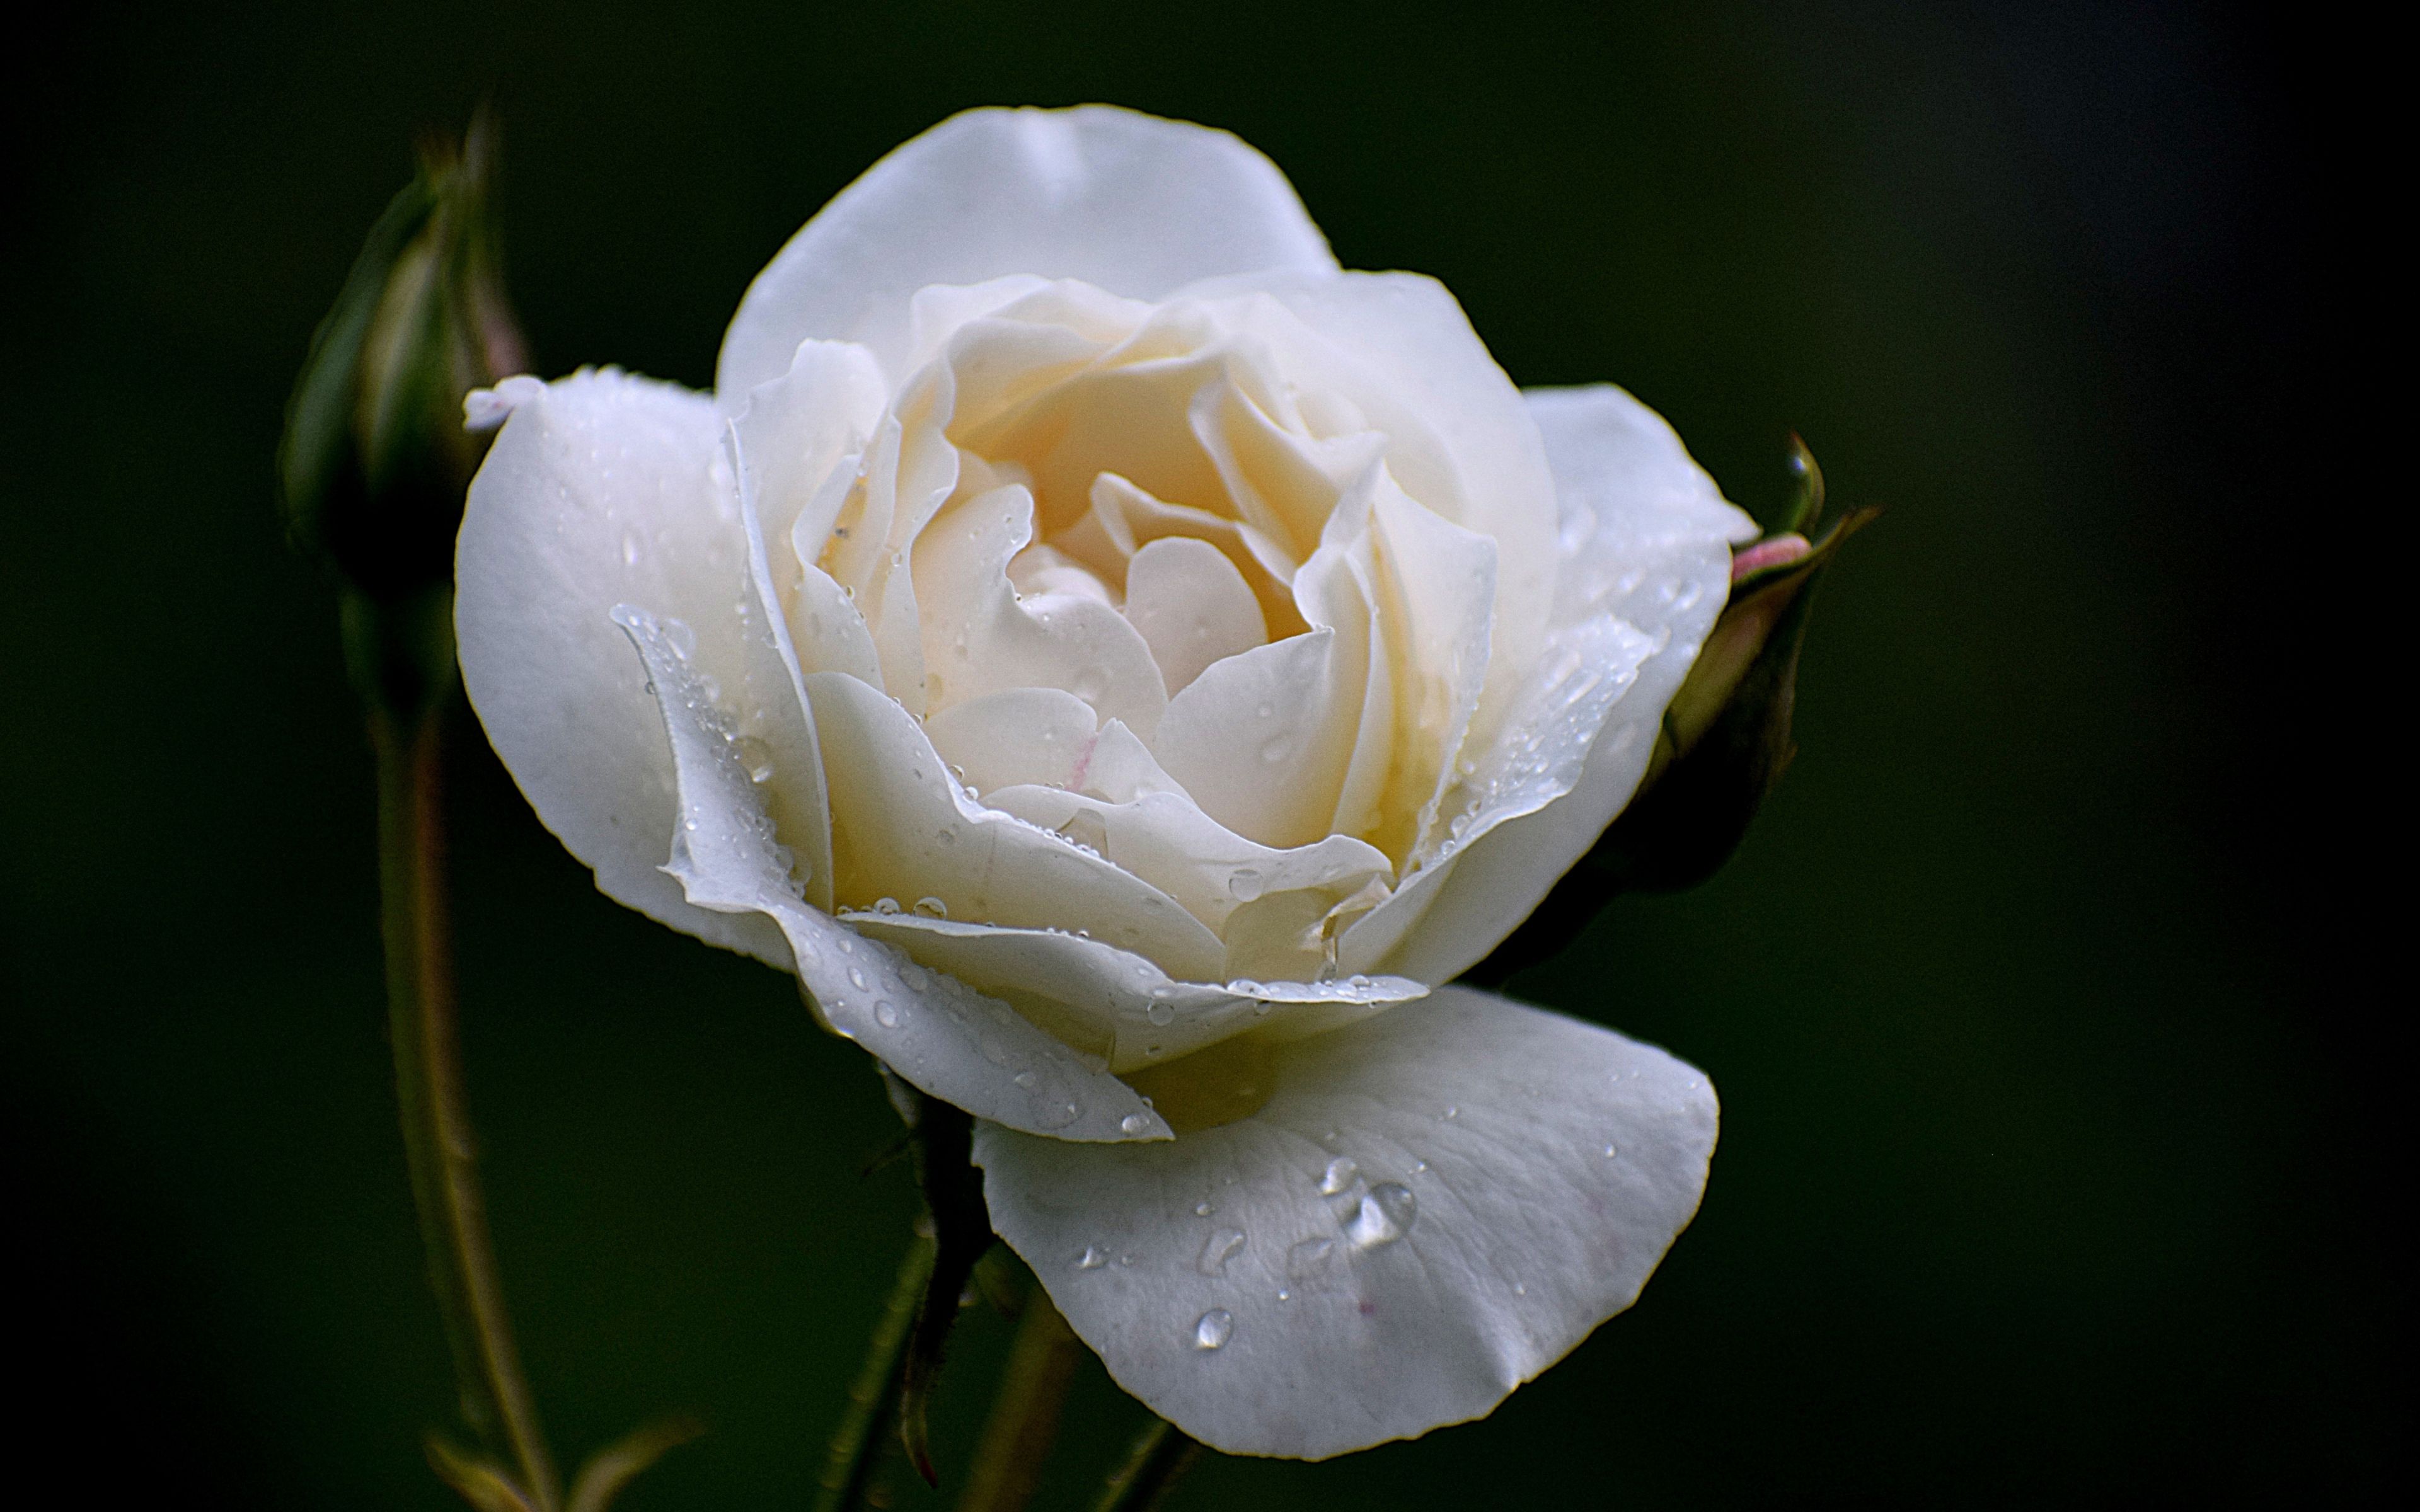 Download 3840x2400 wallpaper white rose, drops, portrait, close up, 4k, ultra HD 16: widescreen, 3840x2400 HD image, background, 5187